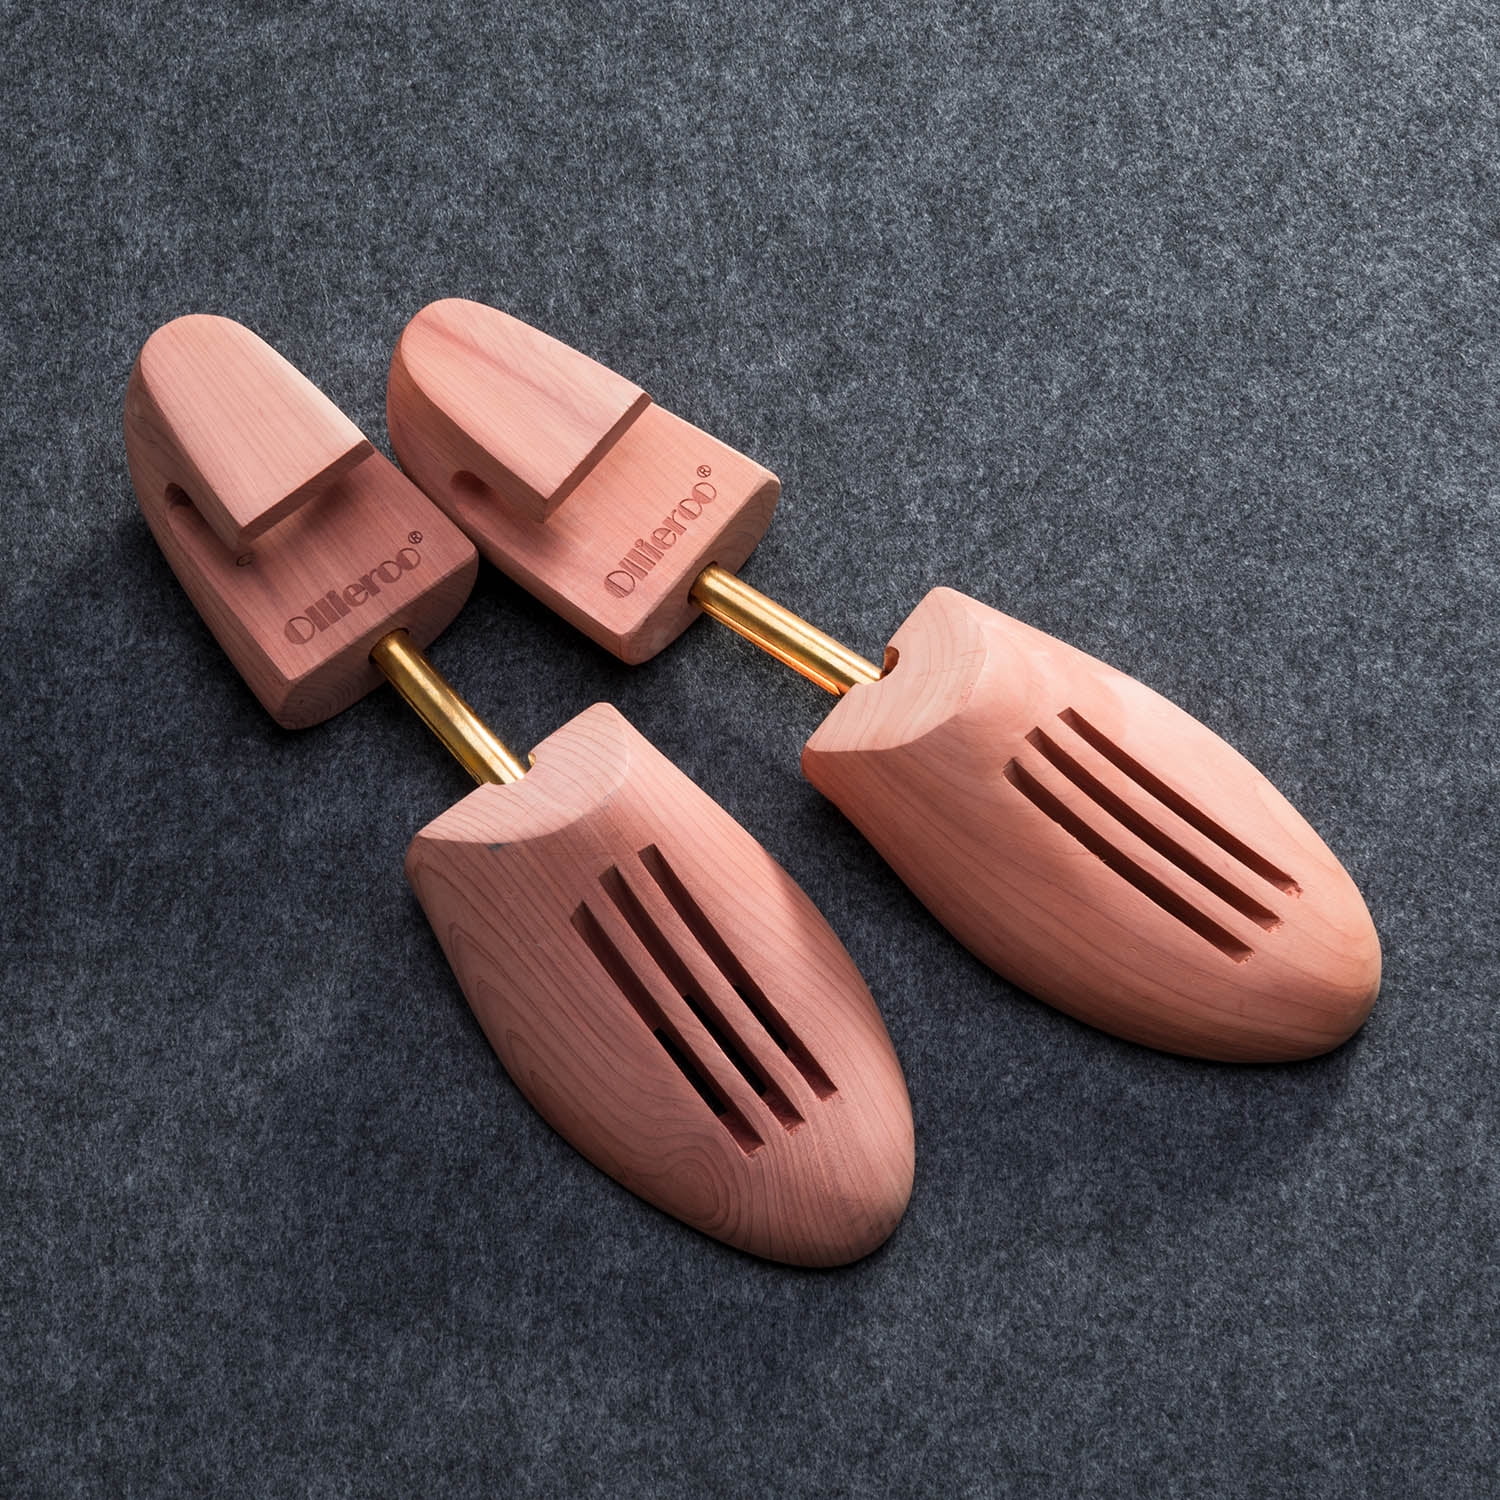 1 Pair US Size 12 Made Of 100% Natural US Red Cedar Adjustable Shoe Trees Cedar Shoe Tree For Men 